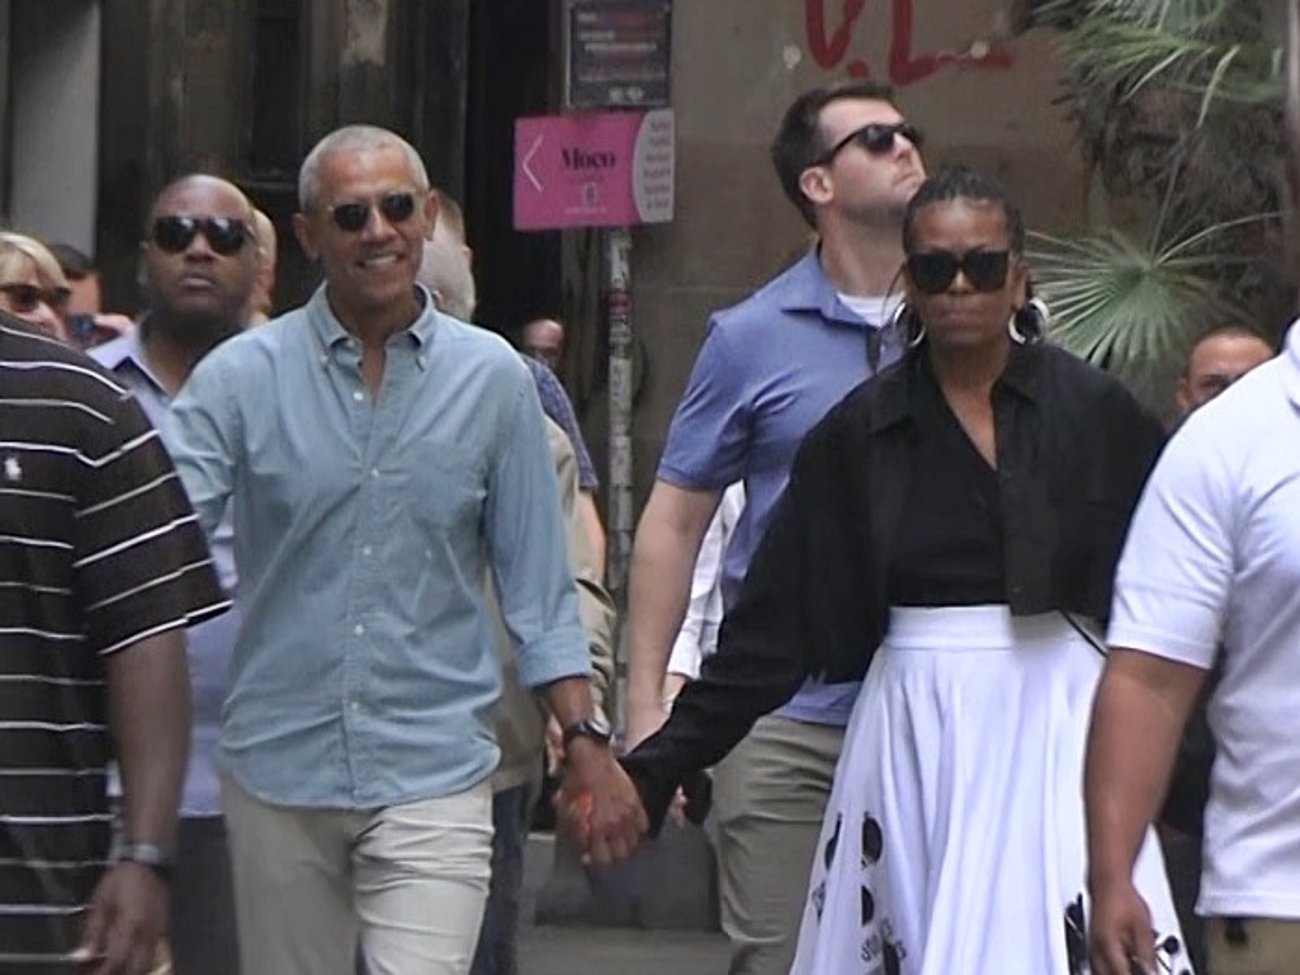 The Obama’s romantic stroll through Barcelona: love at every turn